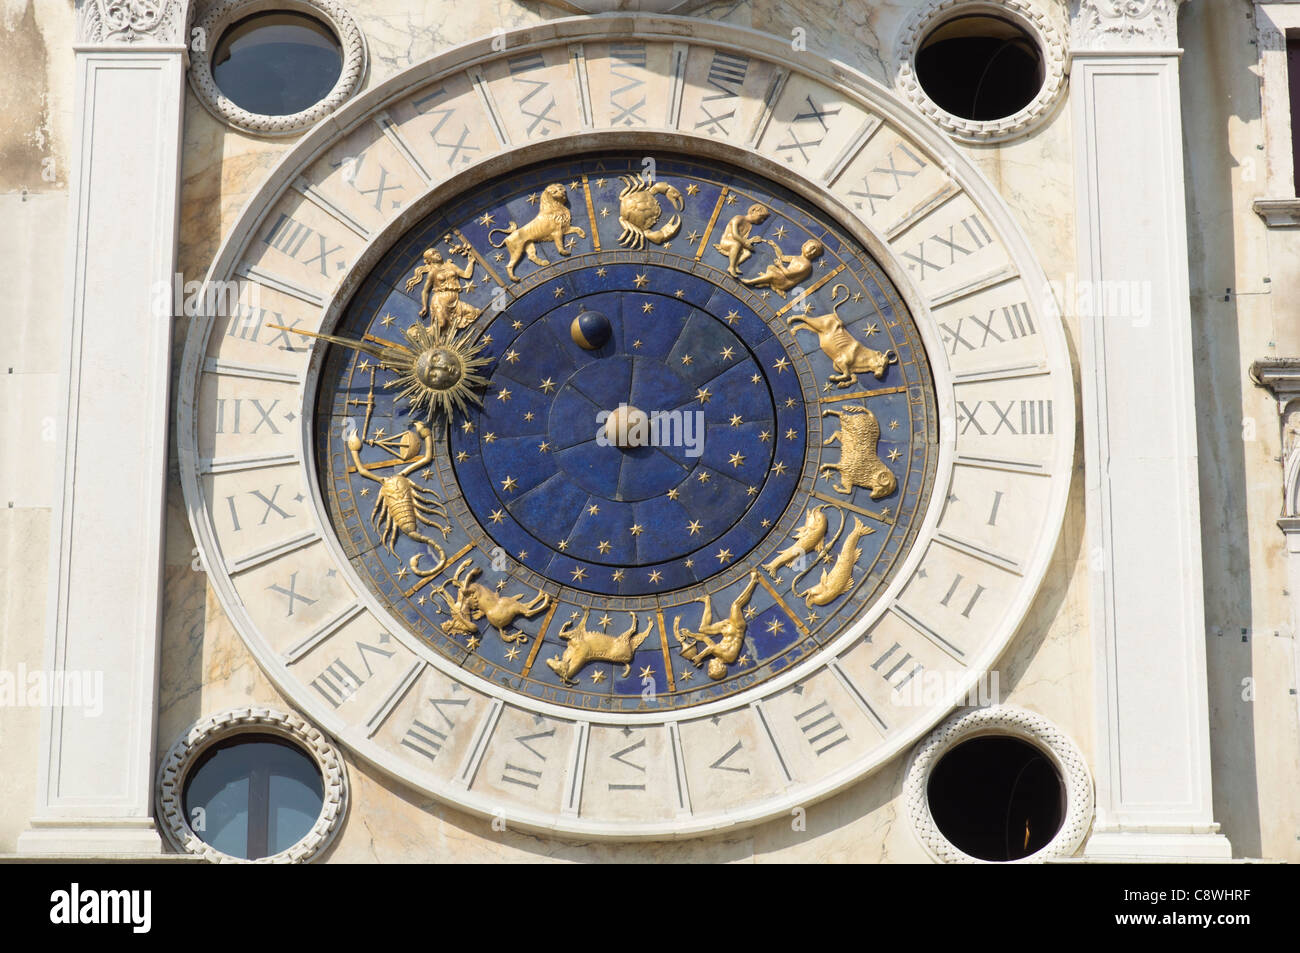 Venice - the astrological clock, San Marco. 24 hour face with star signs. Stock Photo